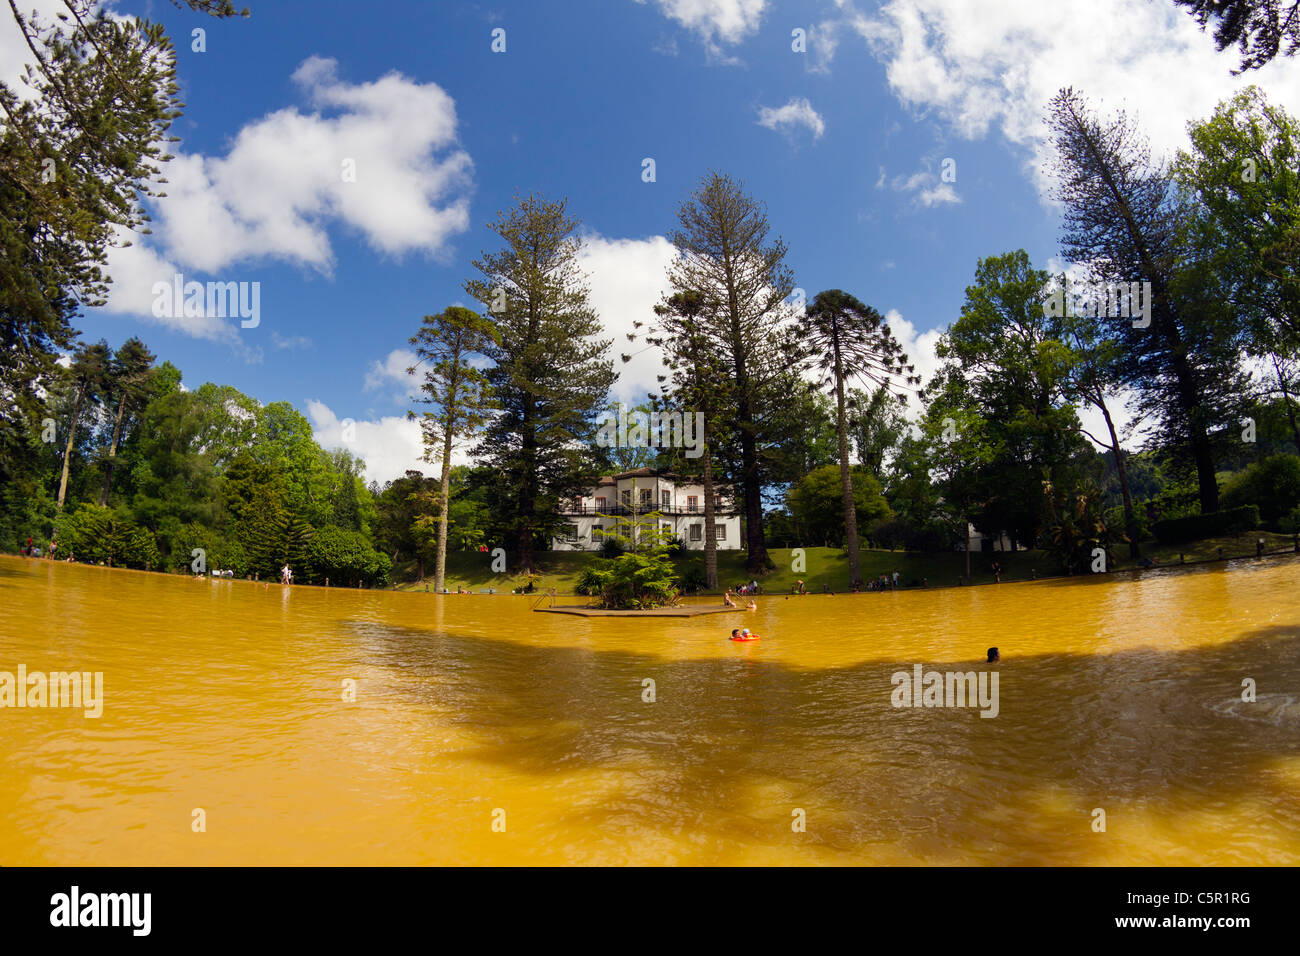 People in the golden water of the original Fountain of Youth, a hot spring in the Terra Nostra Park, Furnas village, Azores. Stock Photo